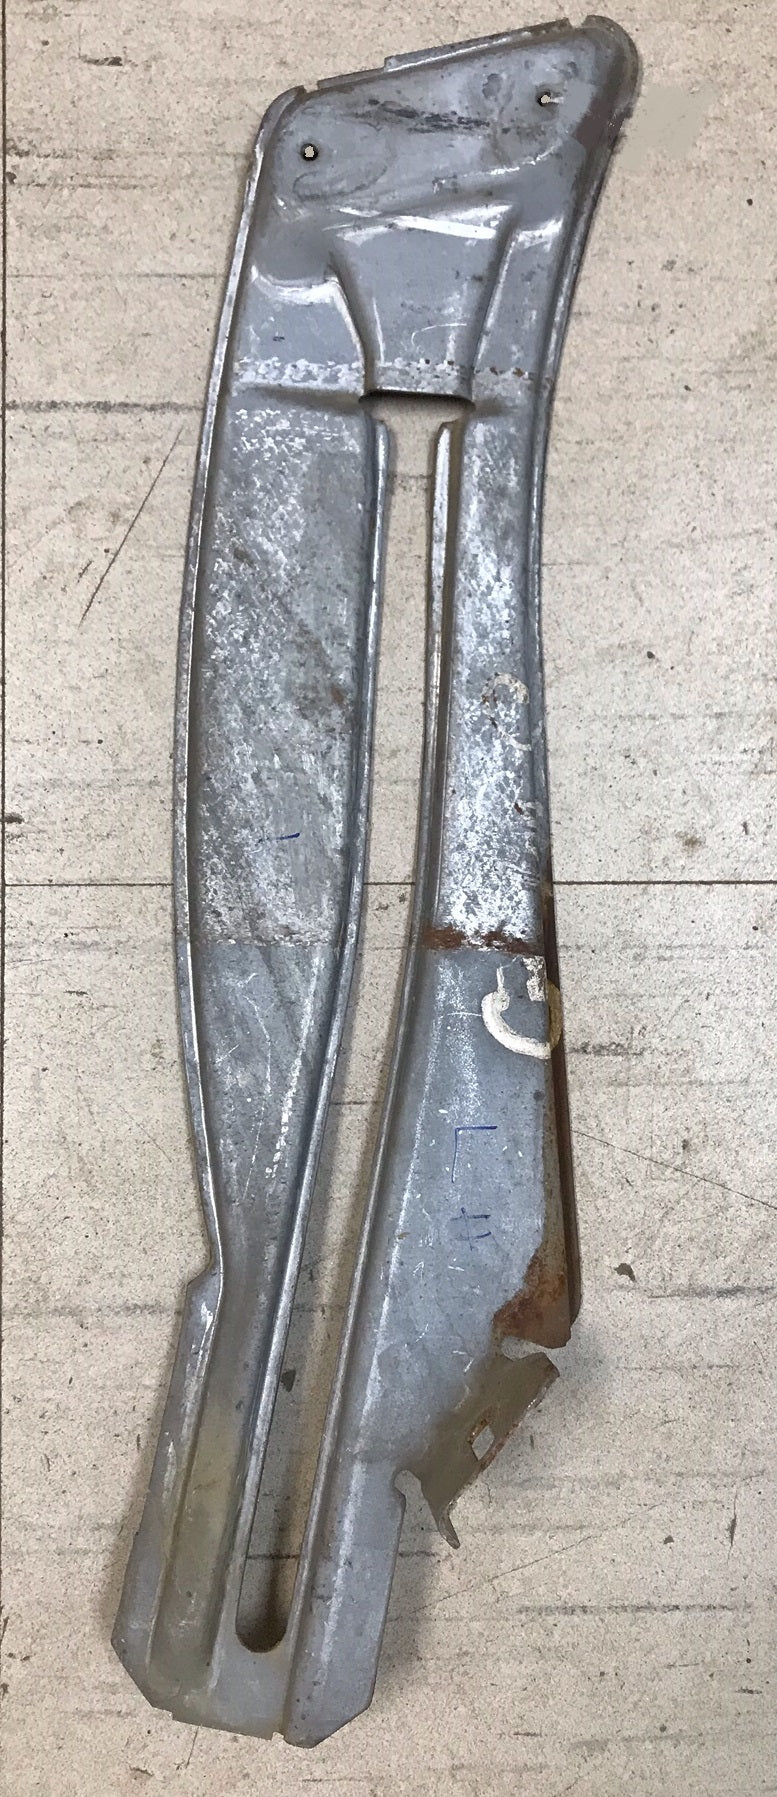 QUARTER GLASS TRACK, LEFT COUP VERTICAL USED 68-72 A-BODY